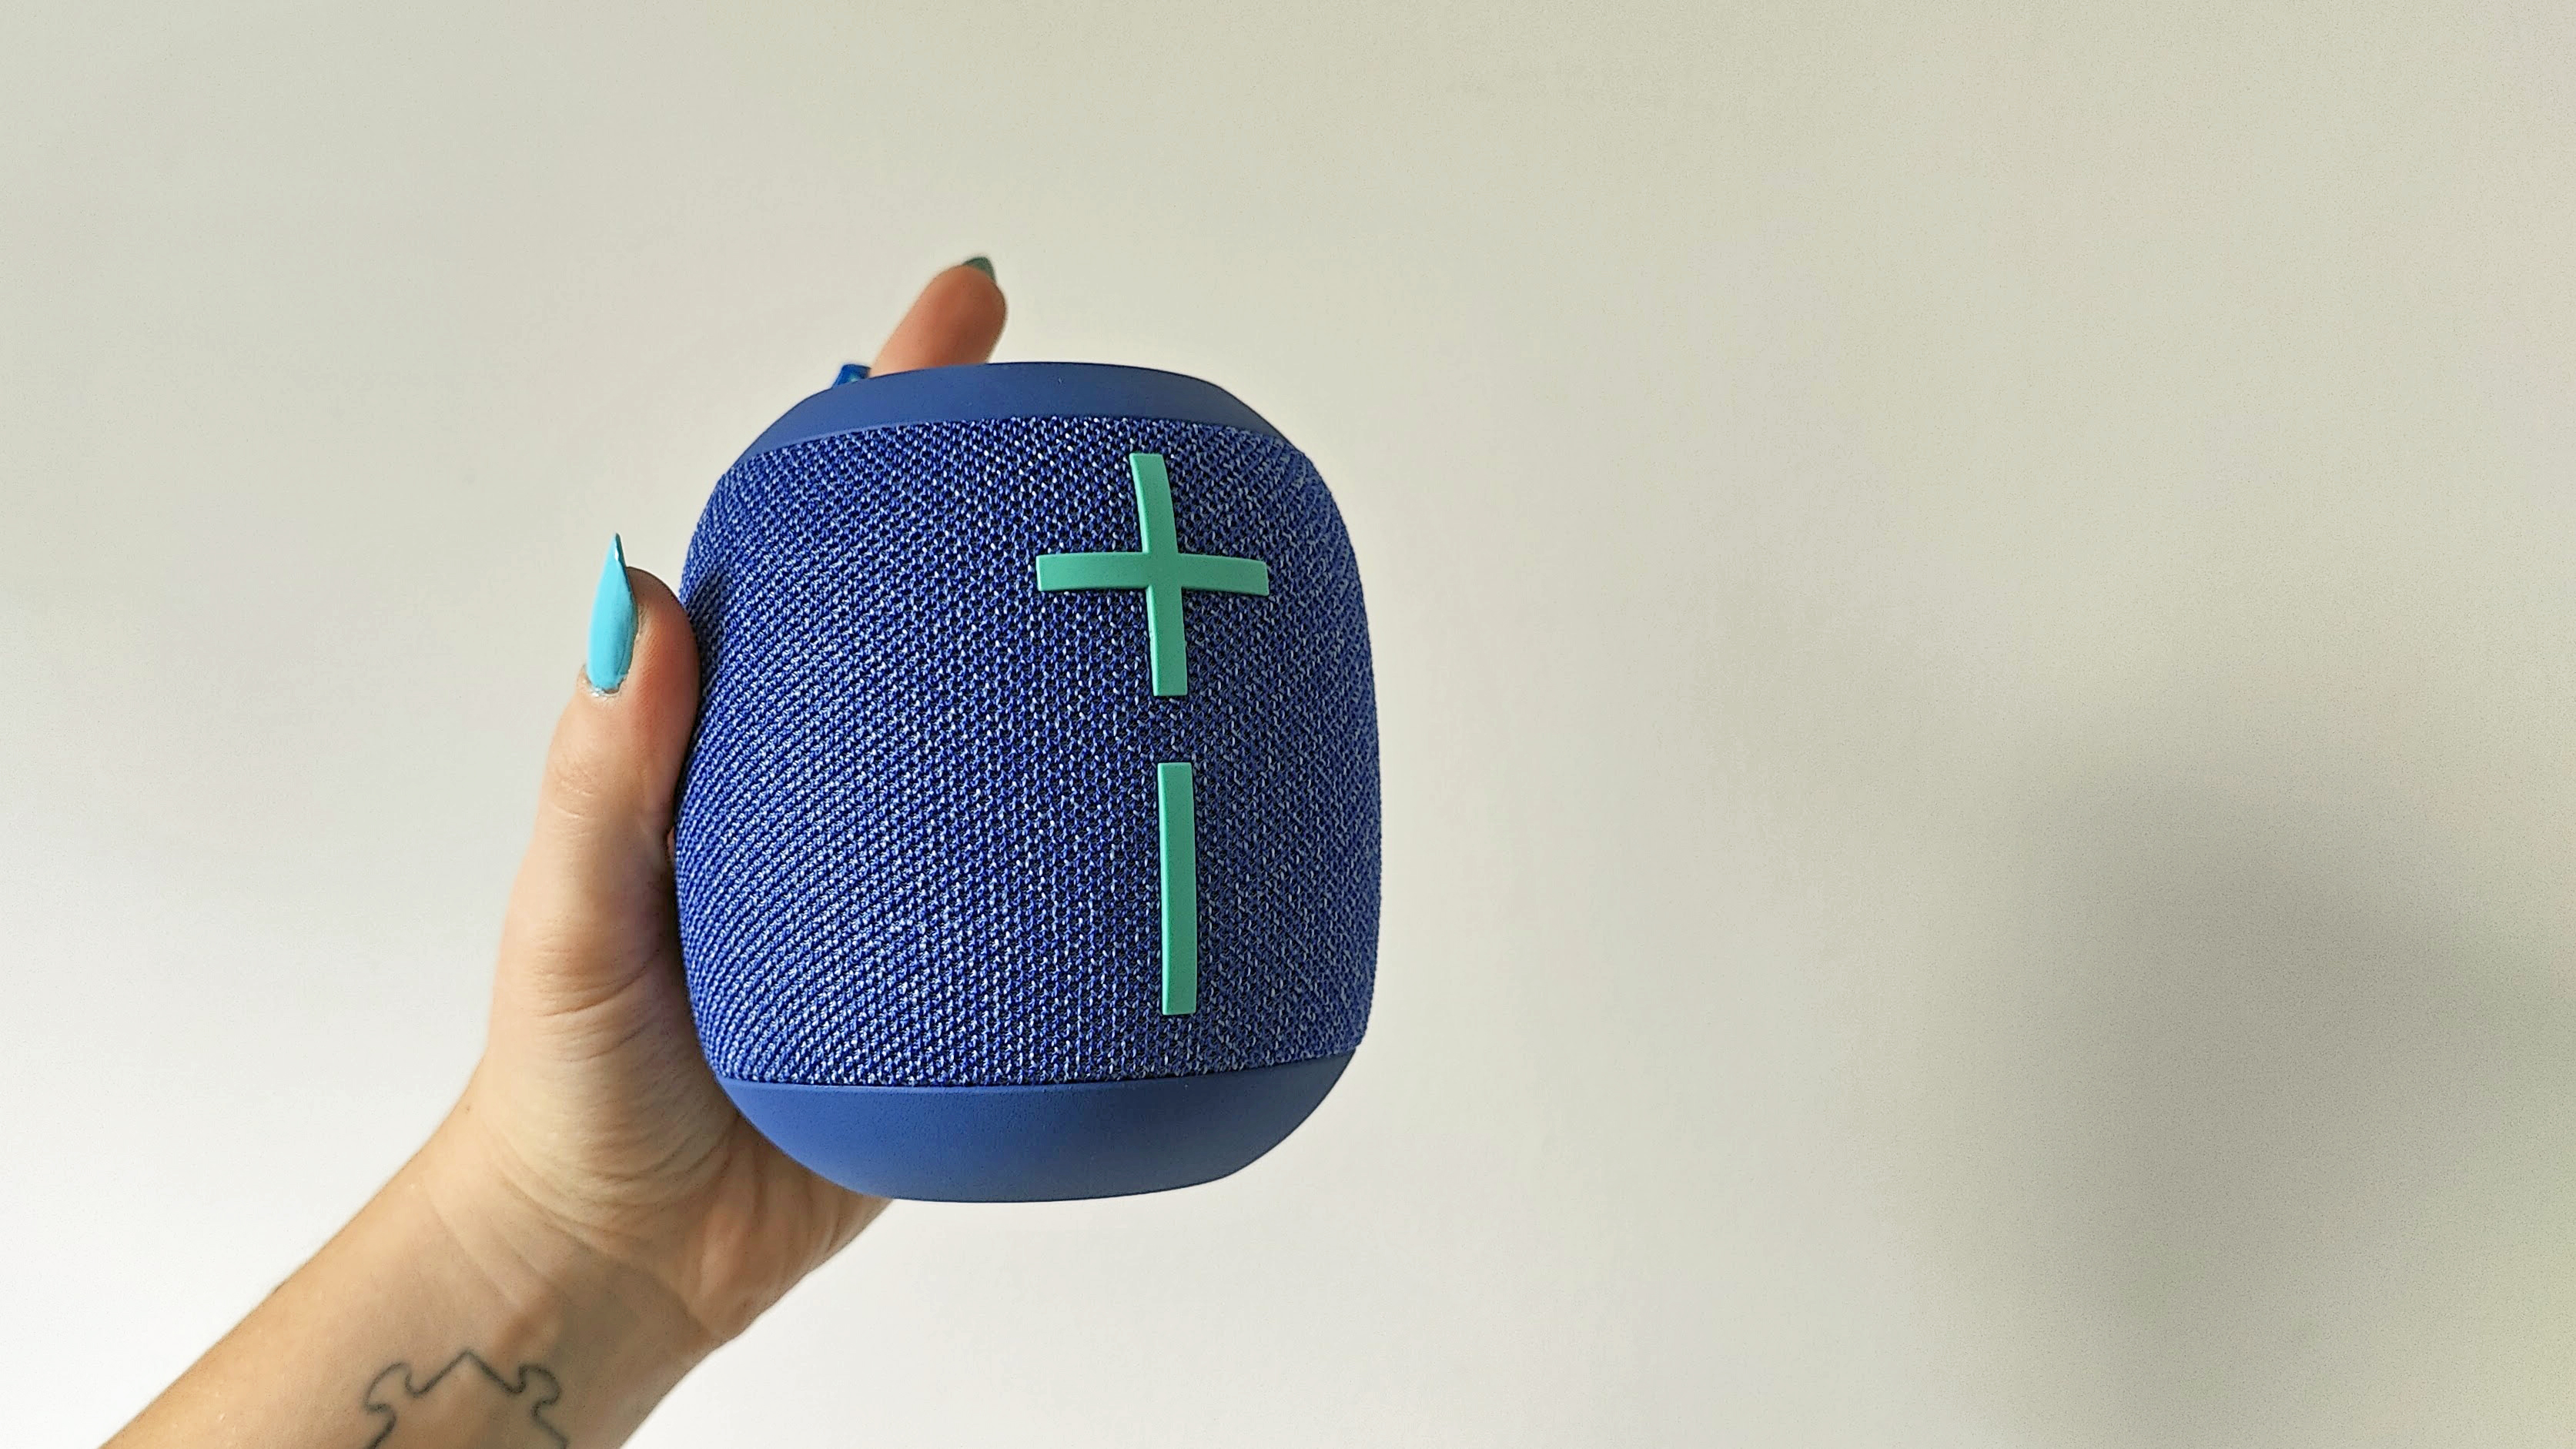 Wonderboom 2 provides big sound from a tiny package